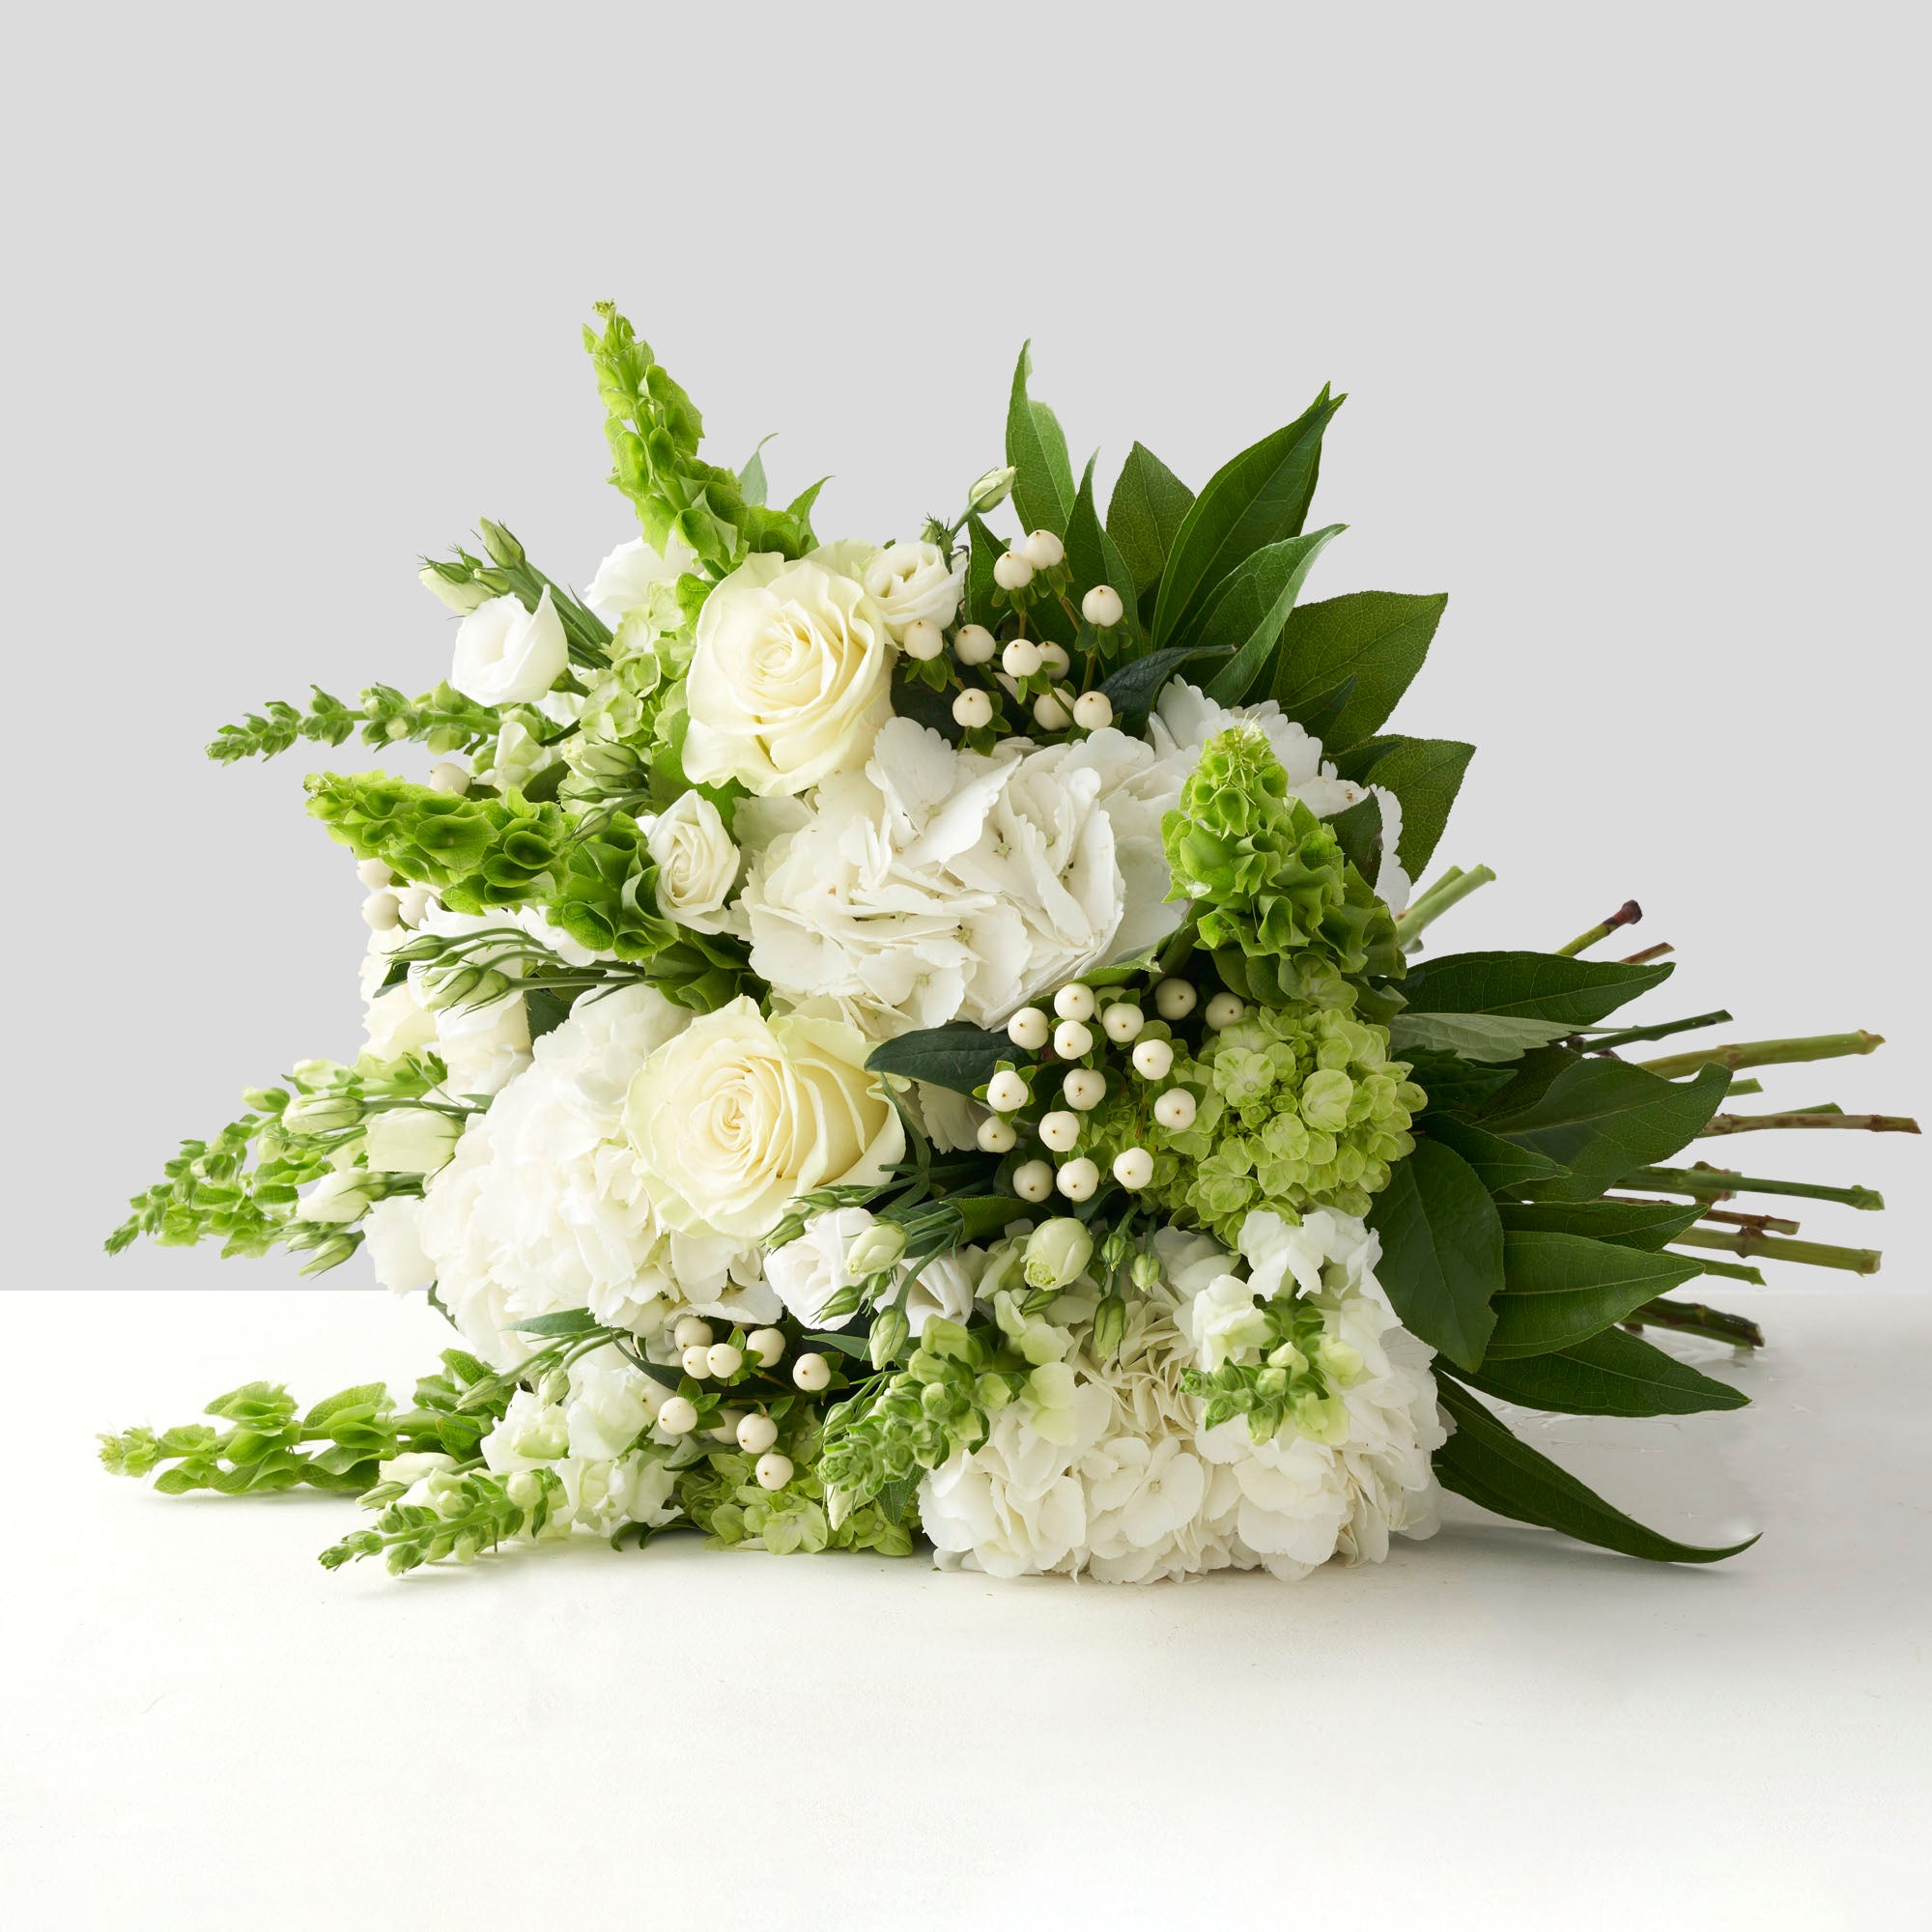 All white and green handtied bouquet on white background.